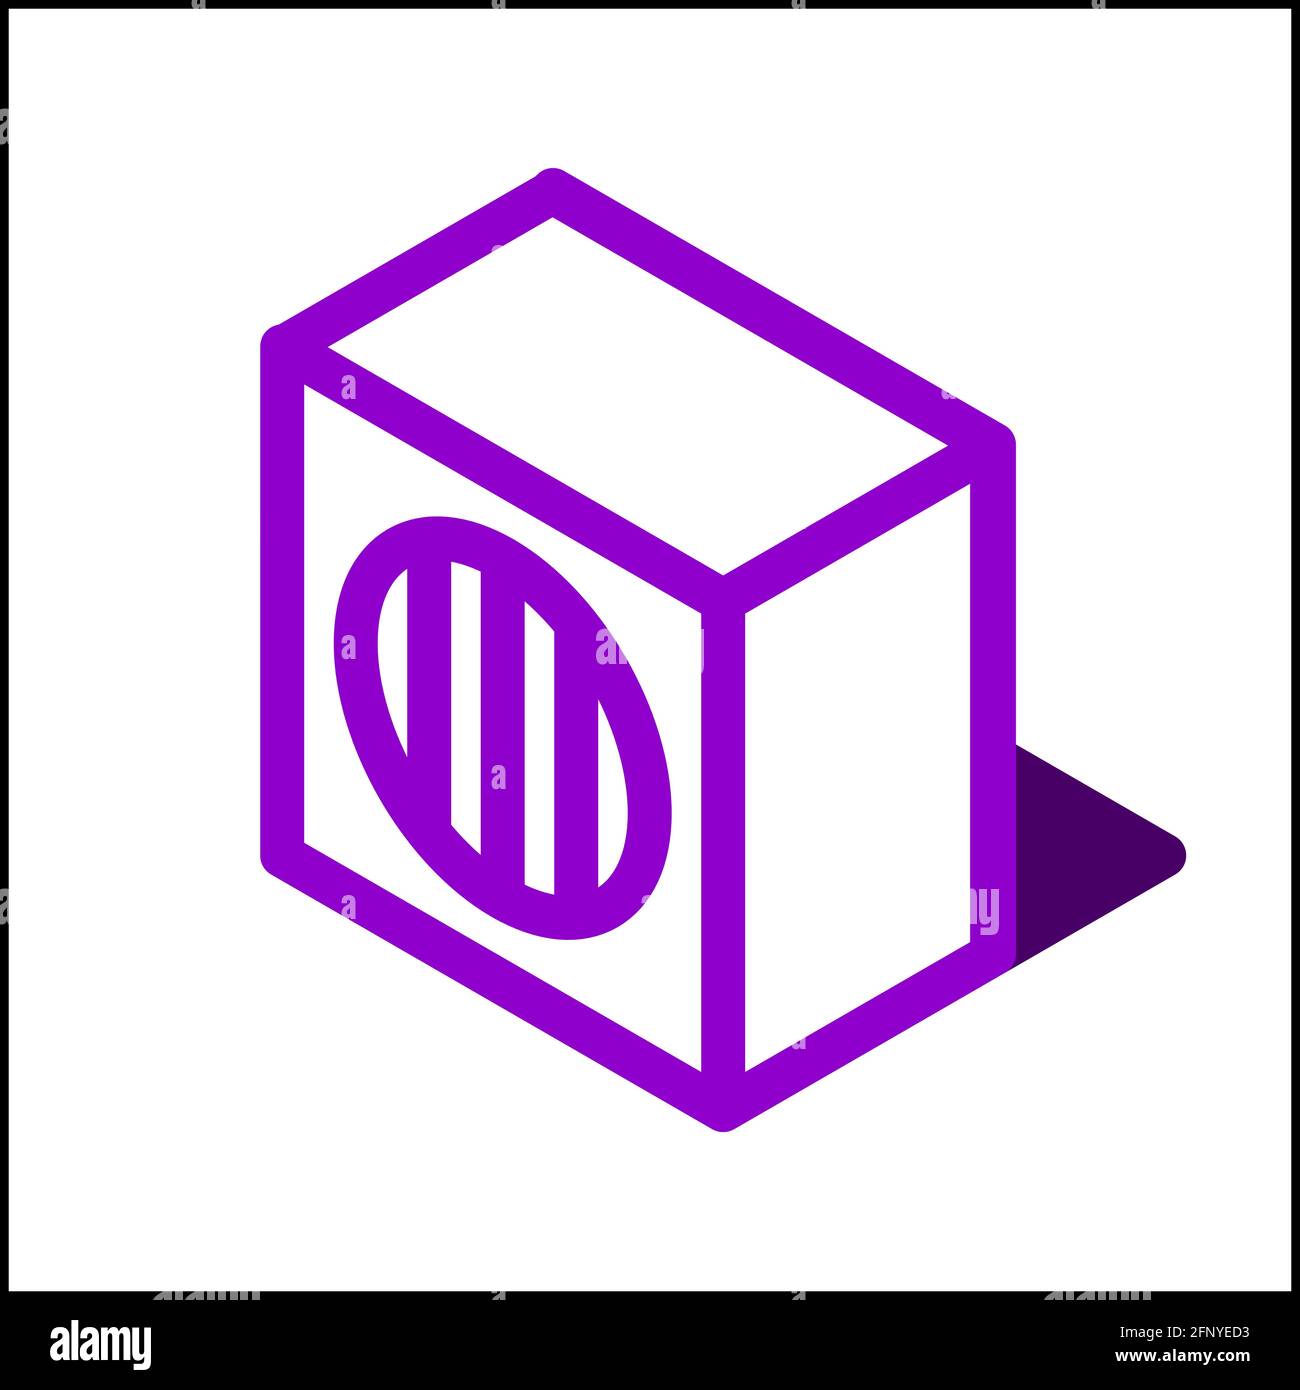 Outdoor unit icon in isometric flat design with purple color and shape of a shadow. Stock Vector